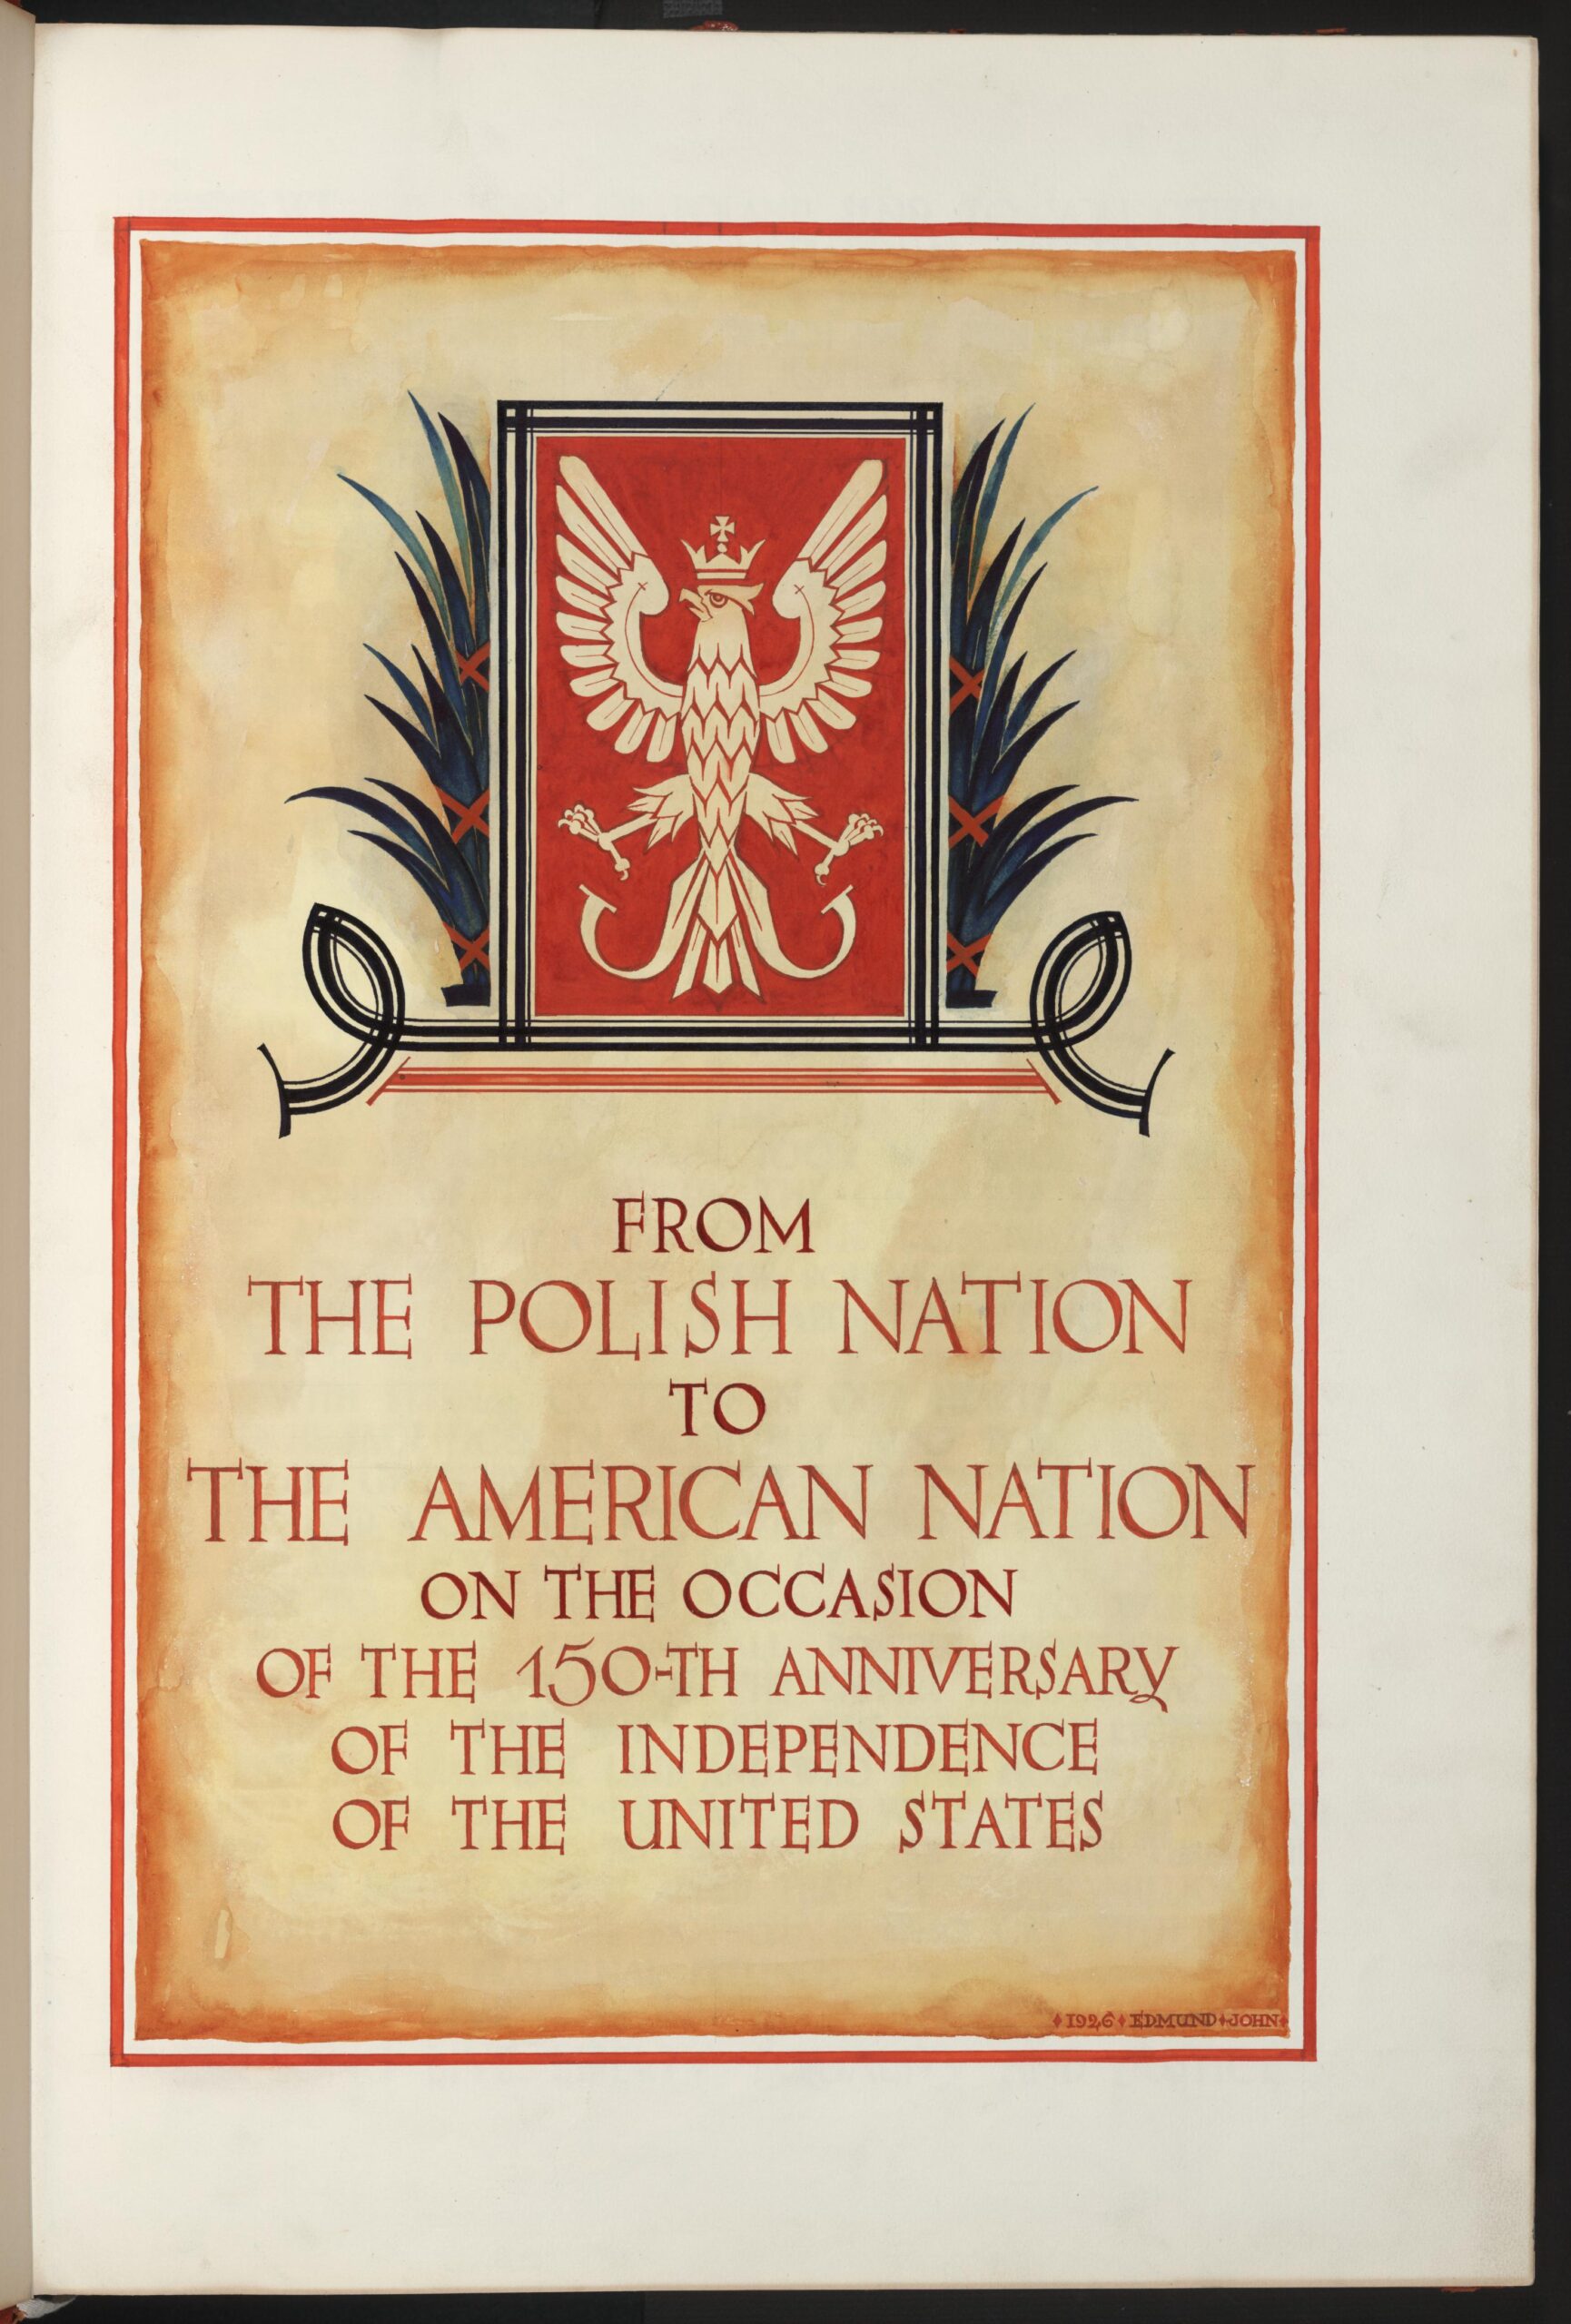 Title Page of the Polish Declaration of Friendship and Admiration 1926